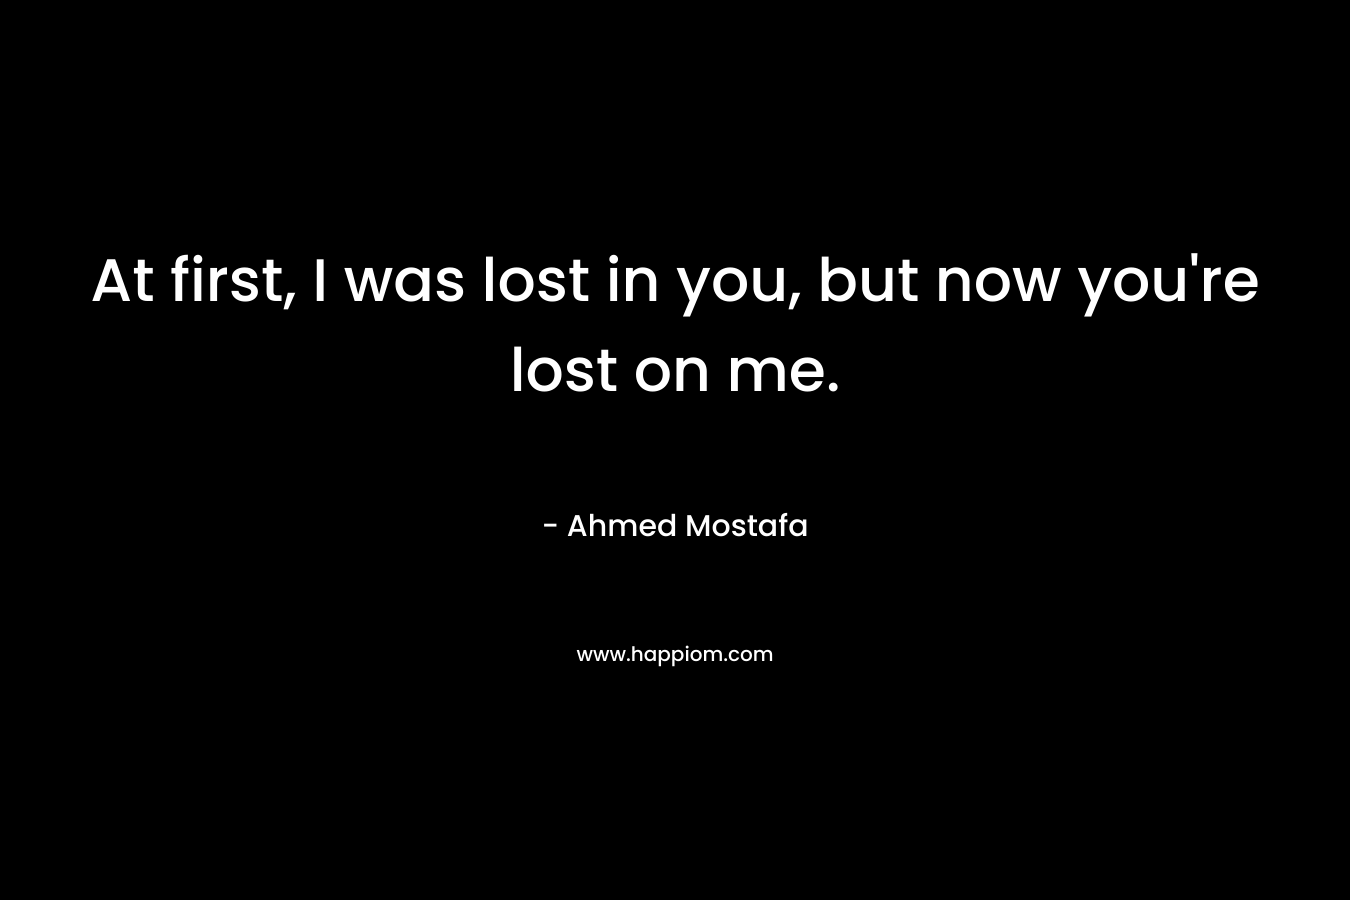 At first, I was lost in you, but now you're lost on me.